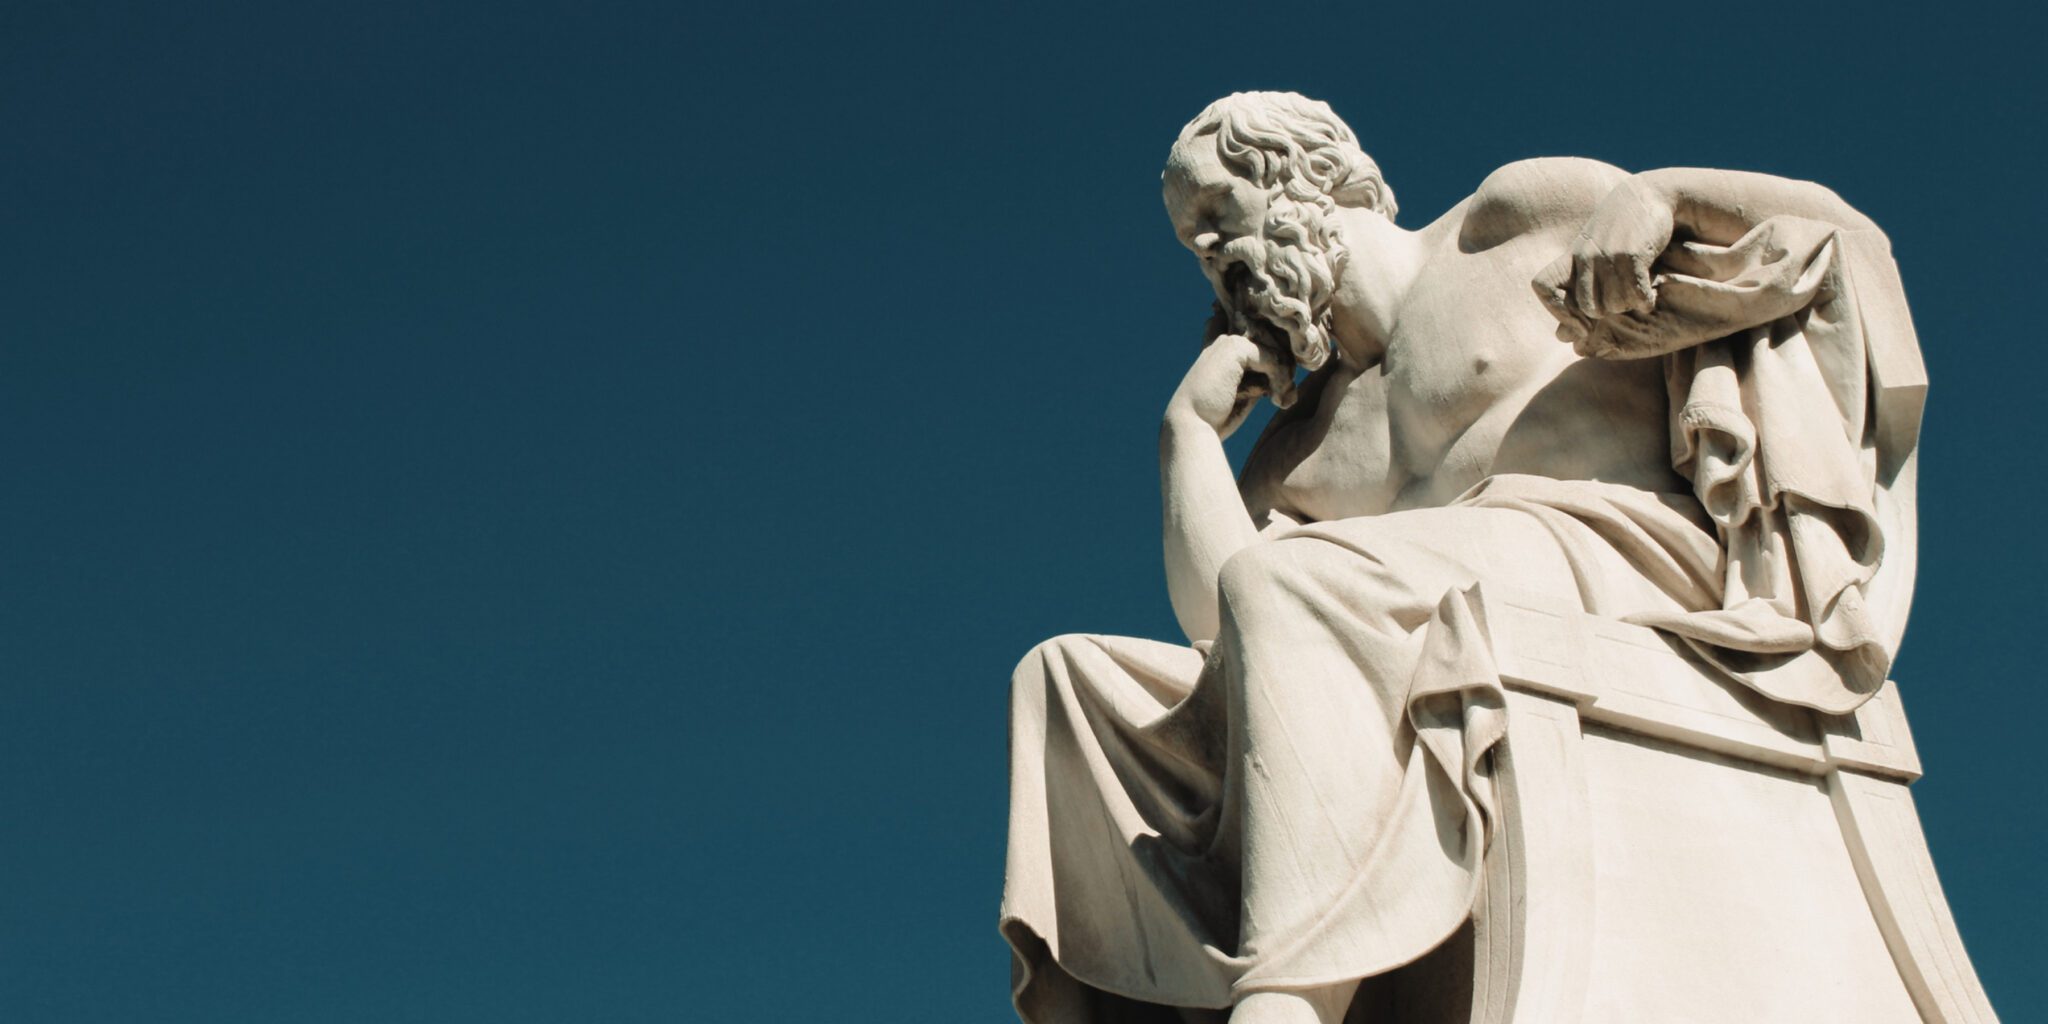 Rediscovering the Philosopher’s Voice